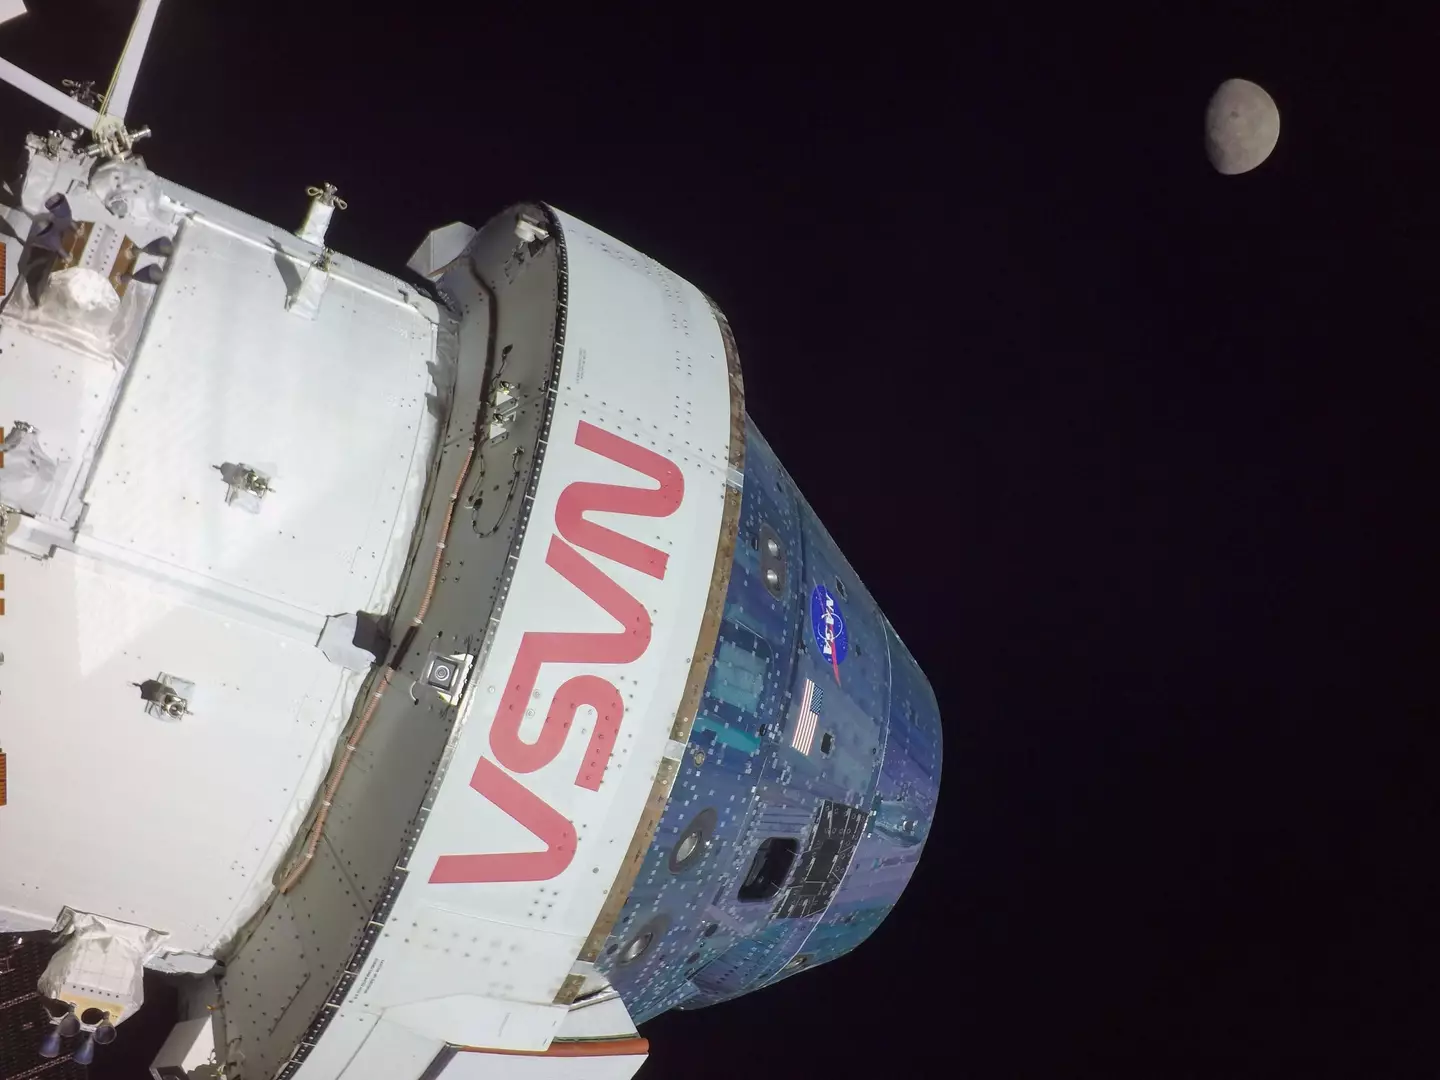 Nasa hope the Orion spacecraft is the first step to get astronauts back on the moon.